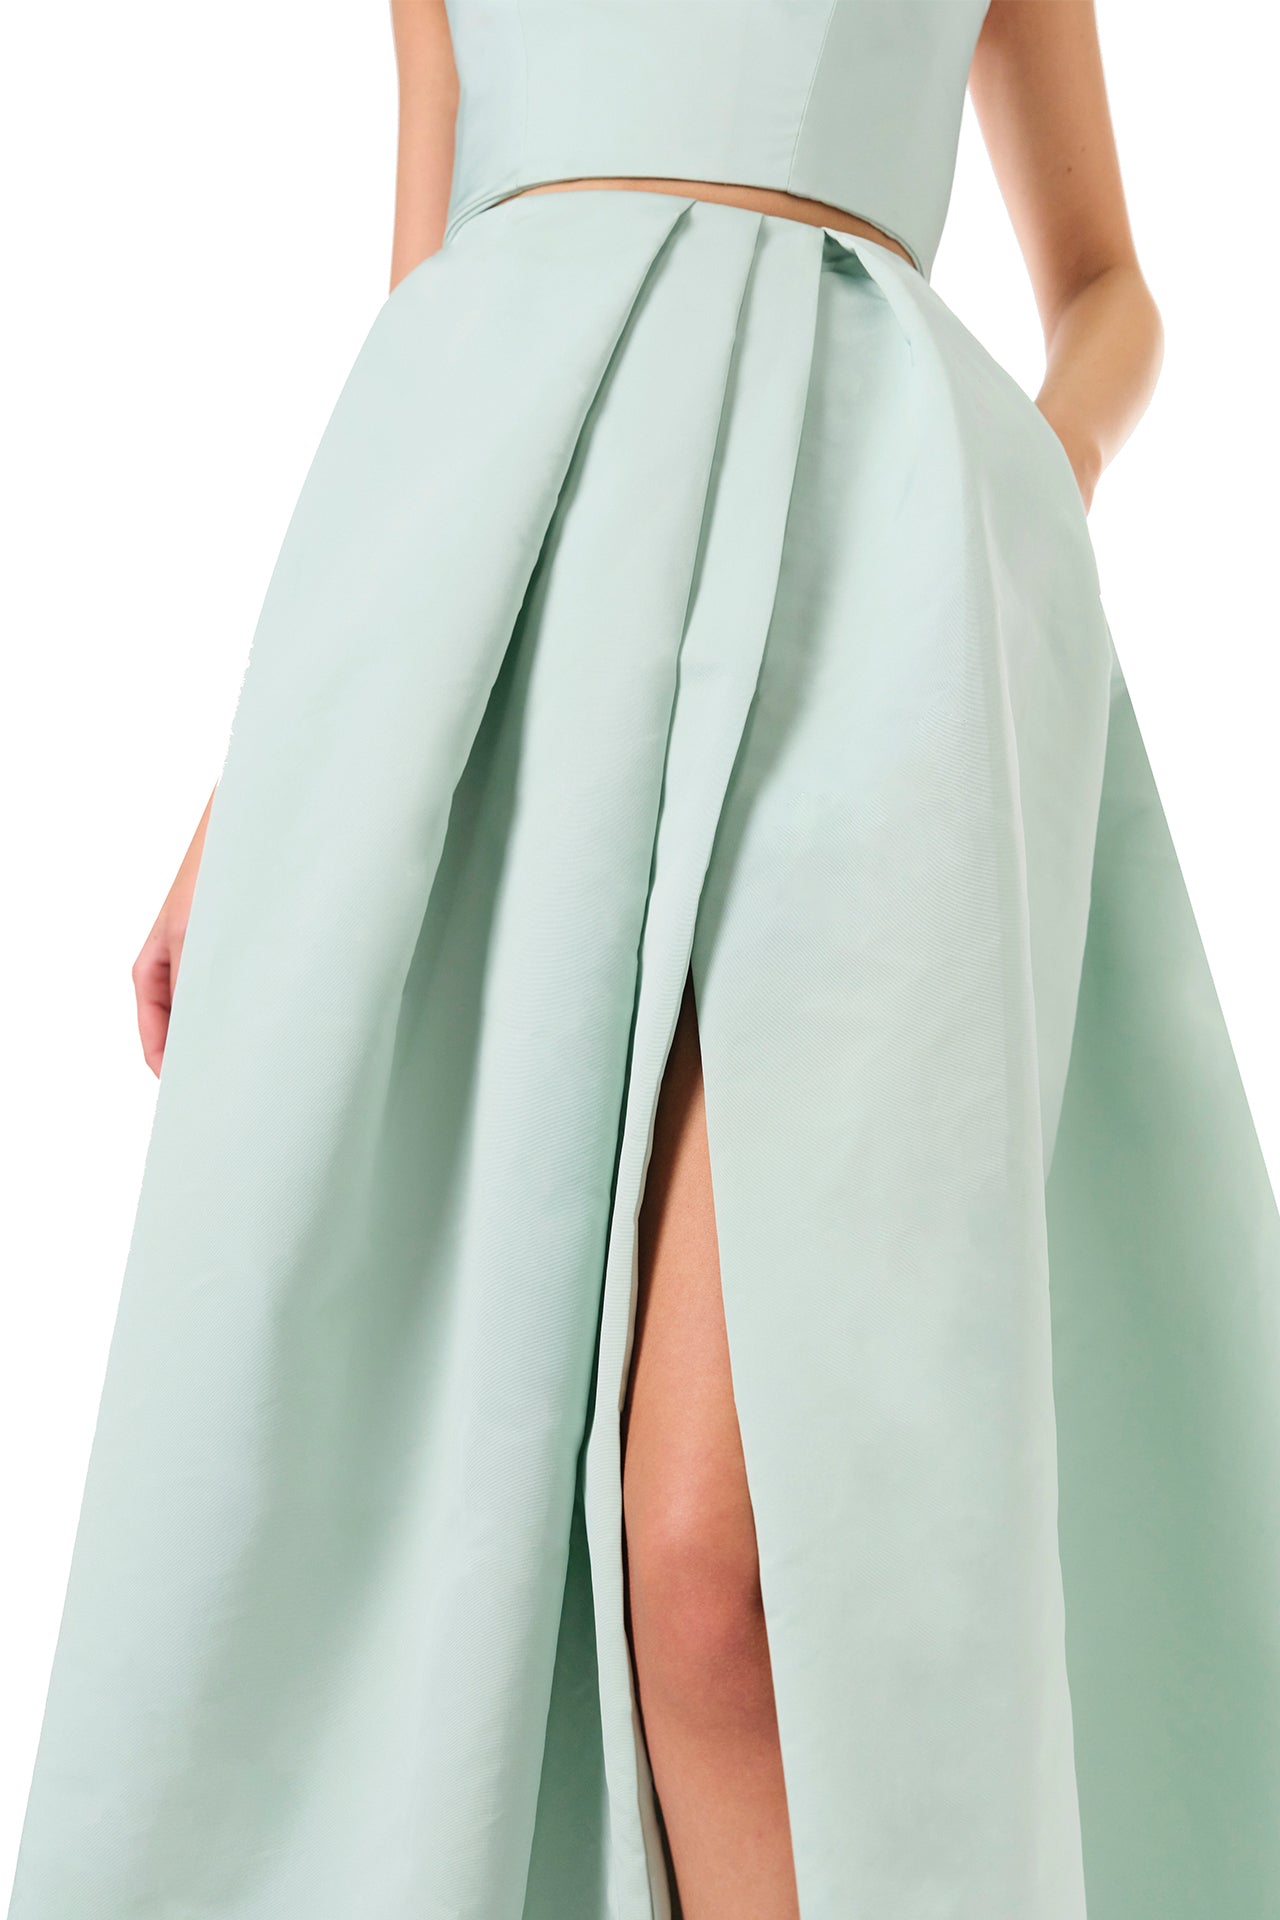 Monique Lhuillier Spring 2023 ball skirt with front slit in pistachio silk faille fabric - slit close up.